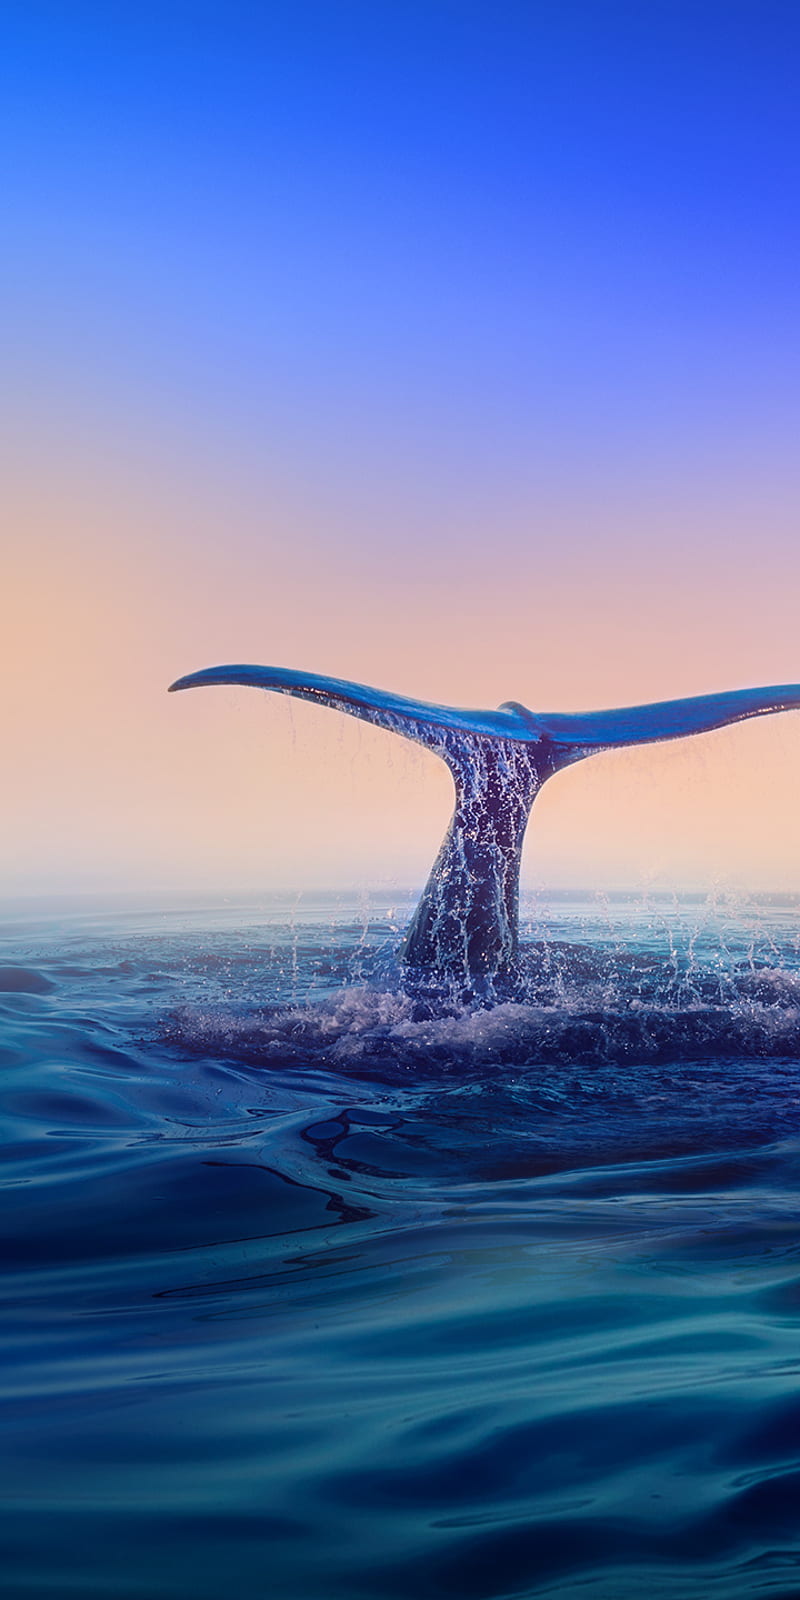 Whale Symphony - Majestic Whale in Moonlit Water by Pure1111 on DeviantArt